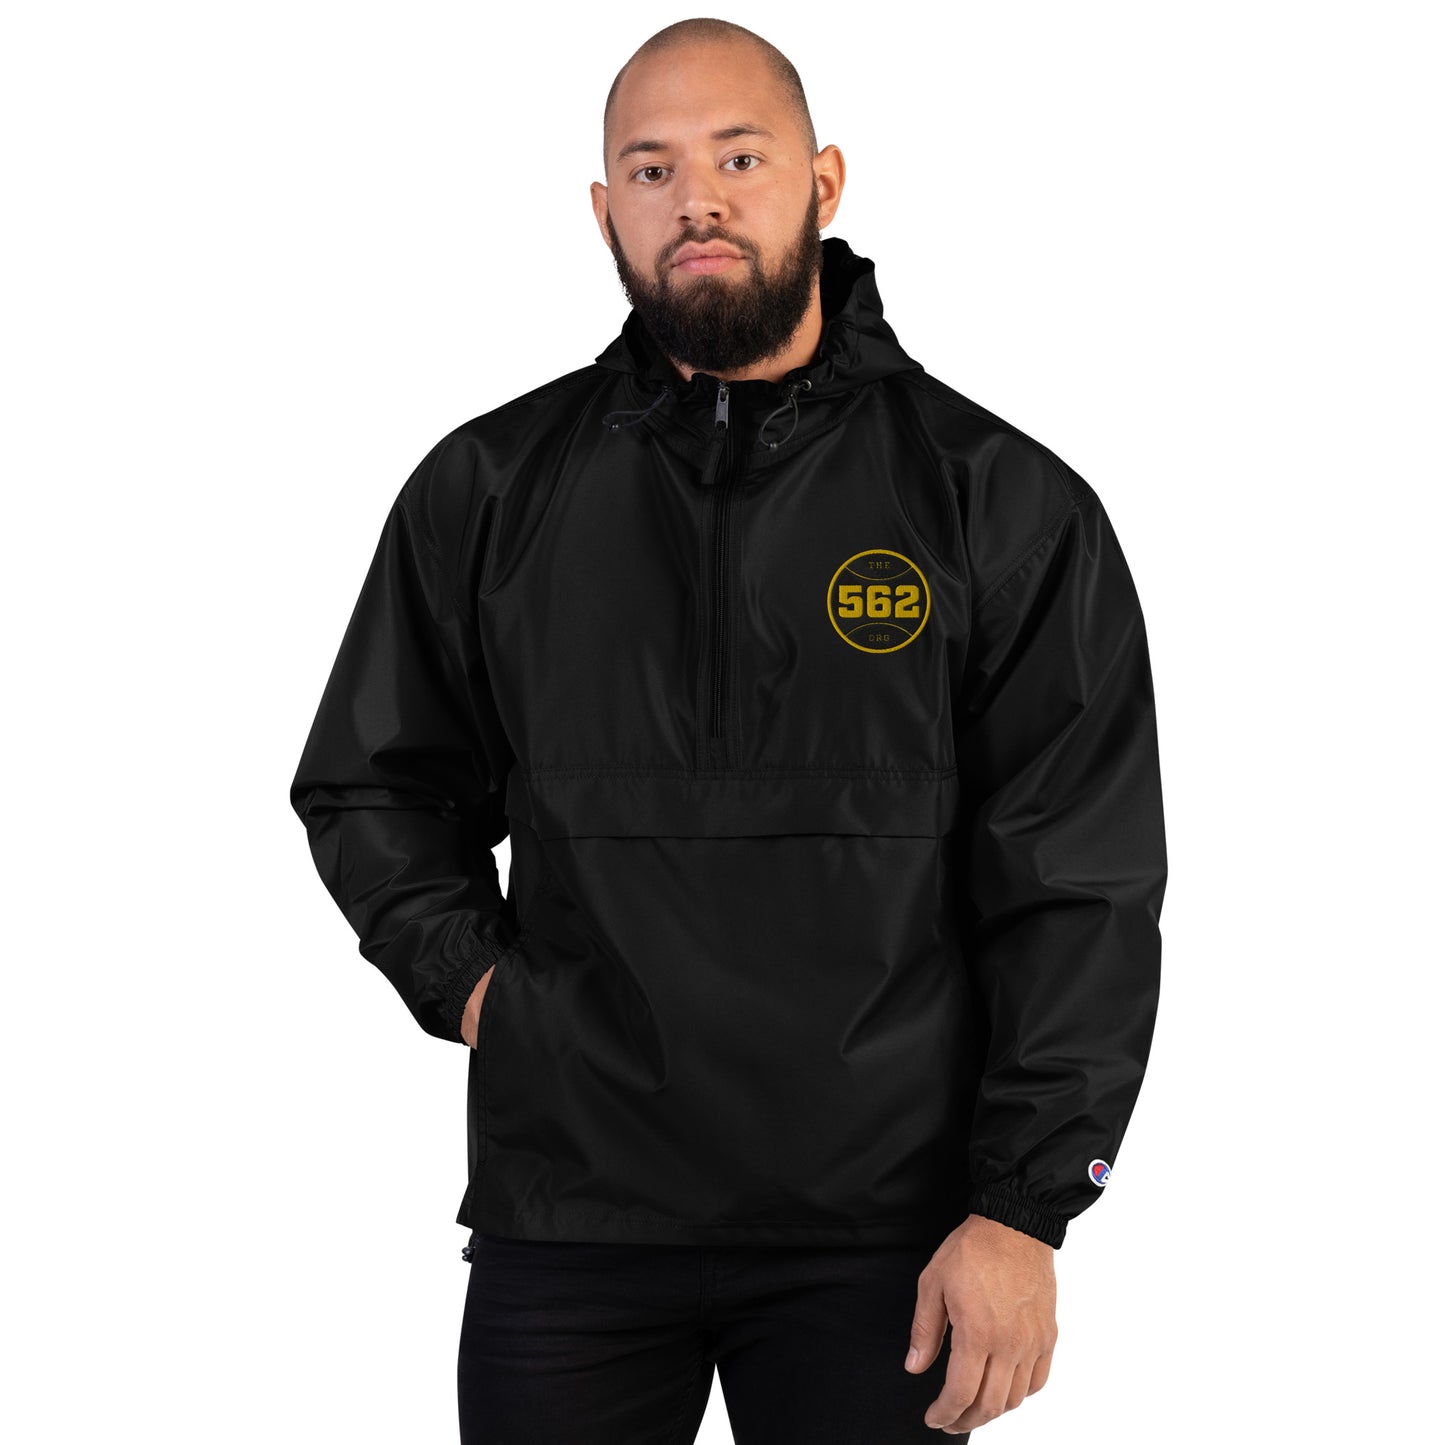 The562 | Embroidered Champion Brand Jacket